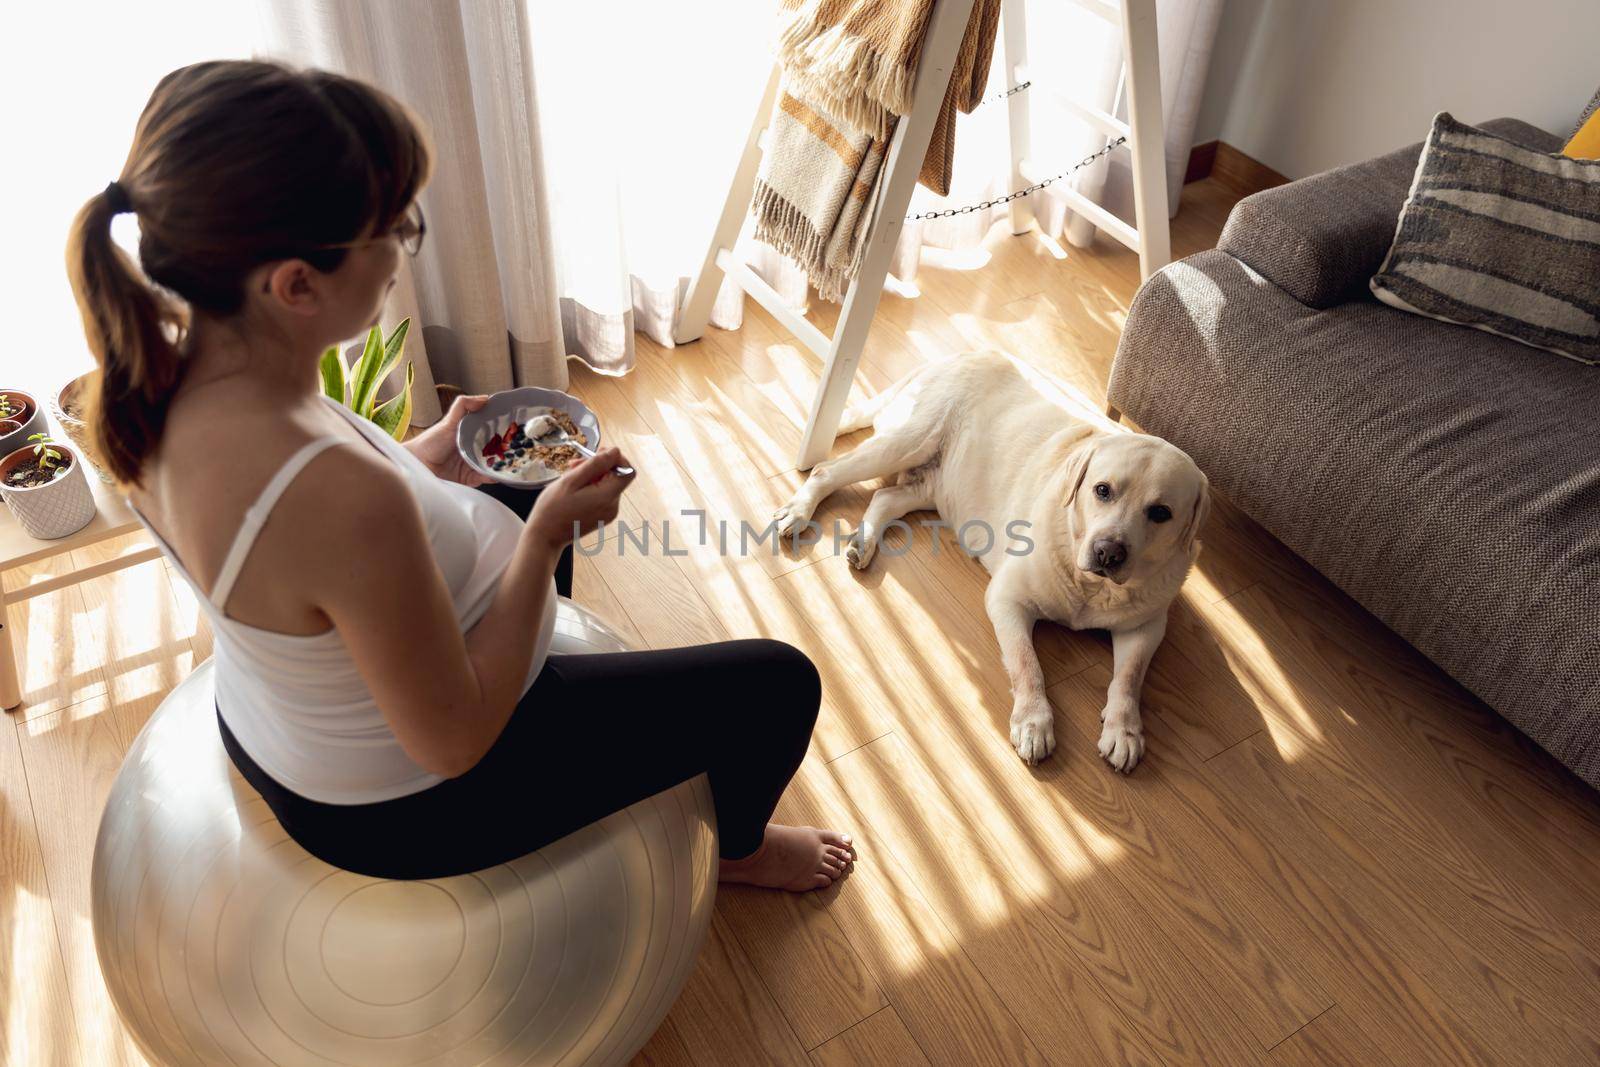 Pregnant woman working at home resting and eating healthy food in the company of her best friend